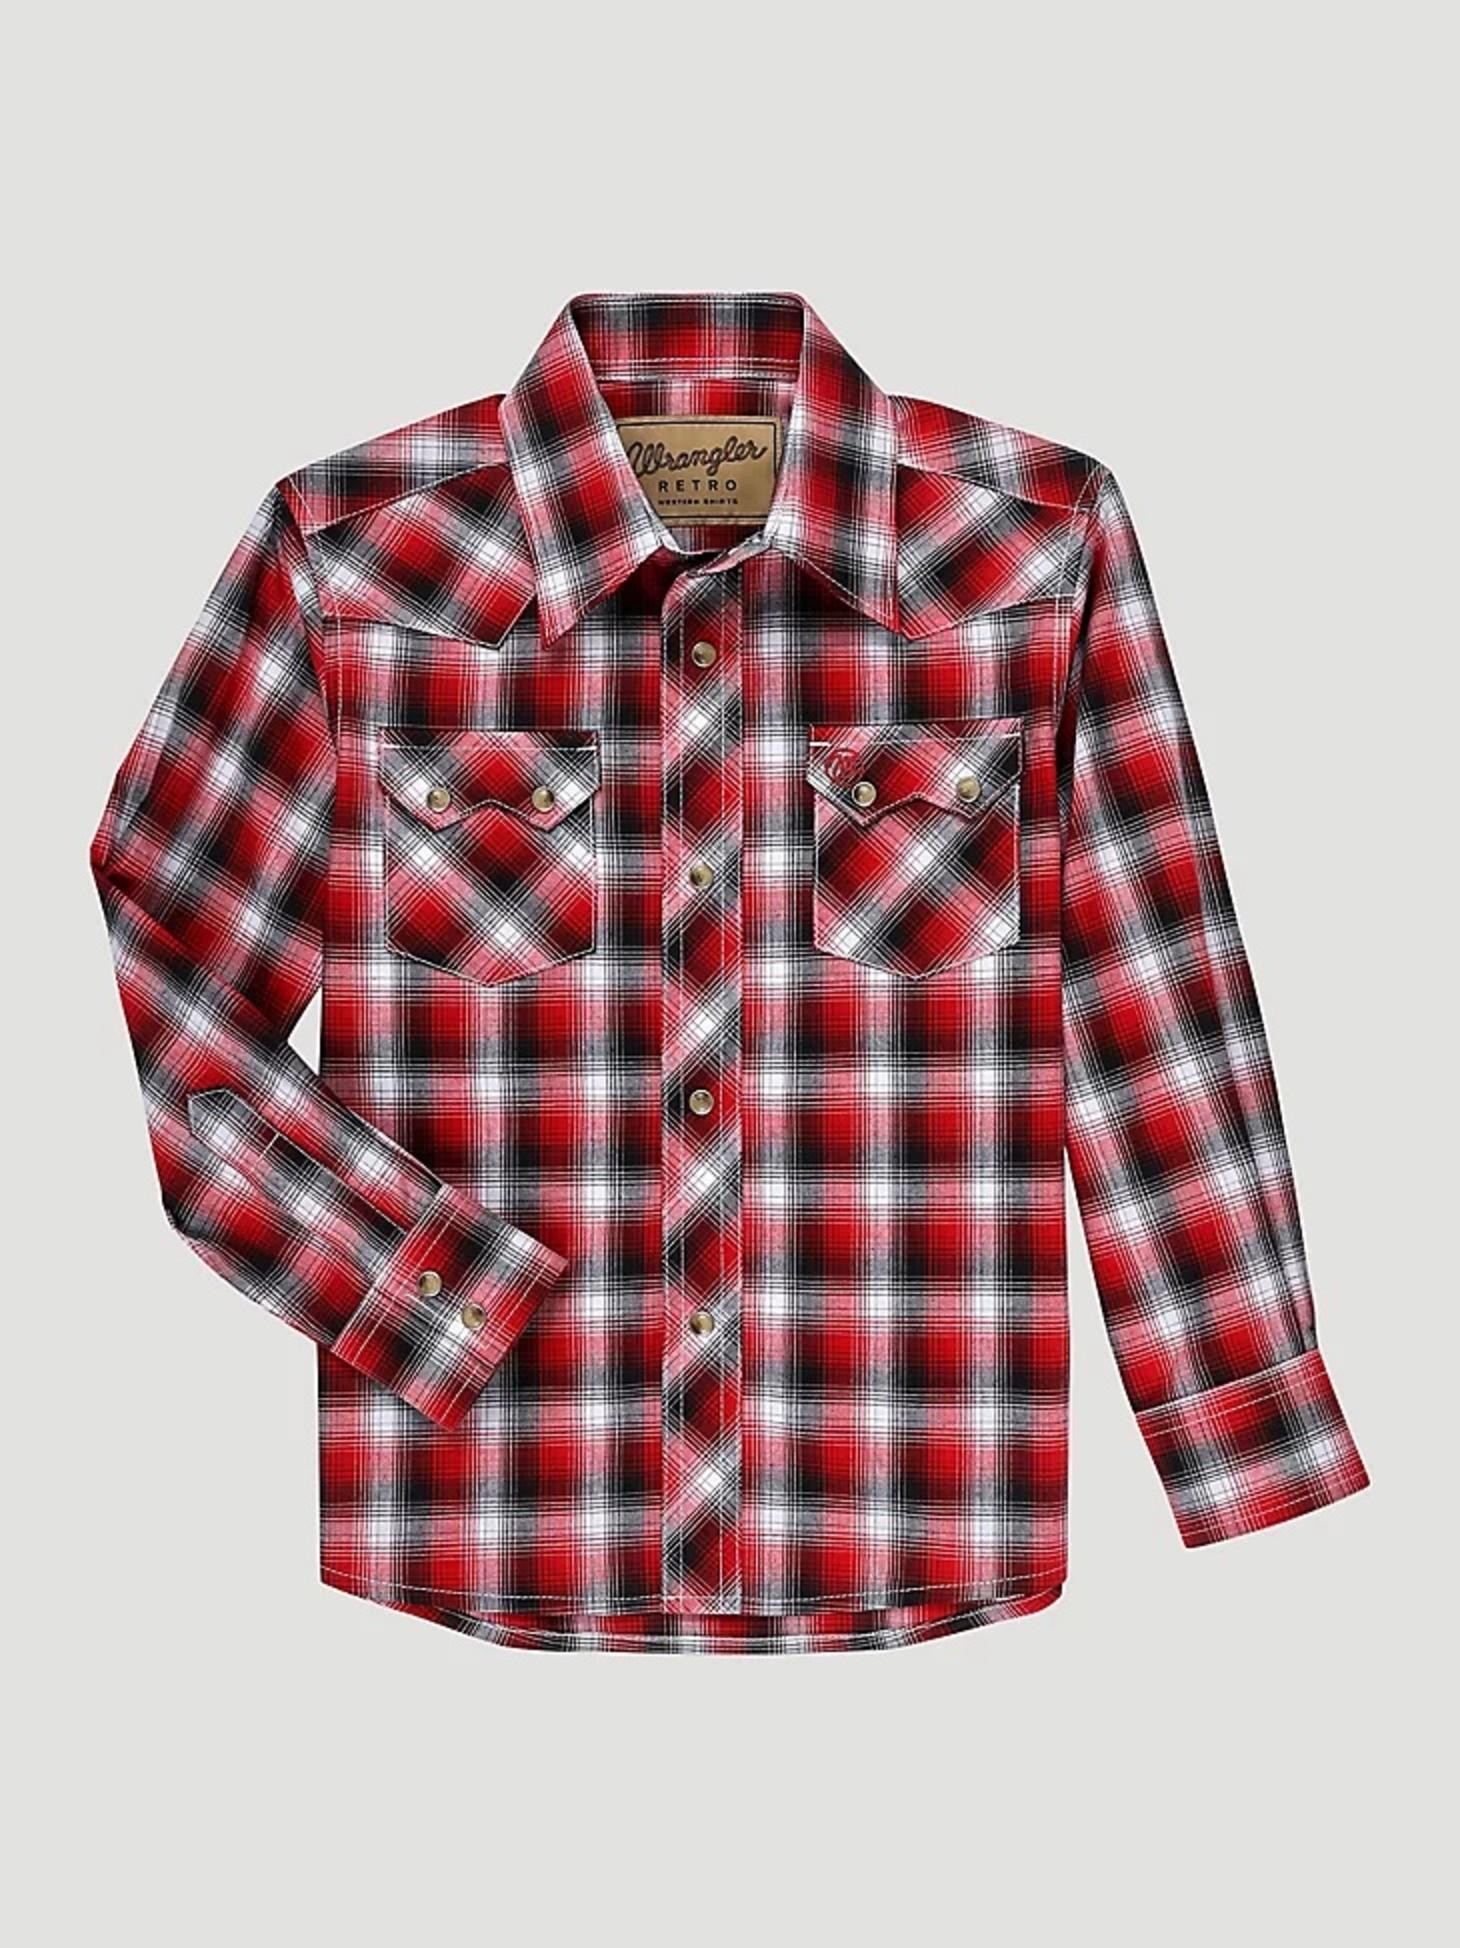  Boy's Wrangler Retro® Western Snap Plaid Shirt With Front Sawtooth Pockets In RED FRONT VIEW